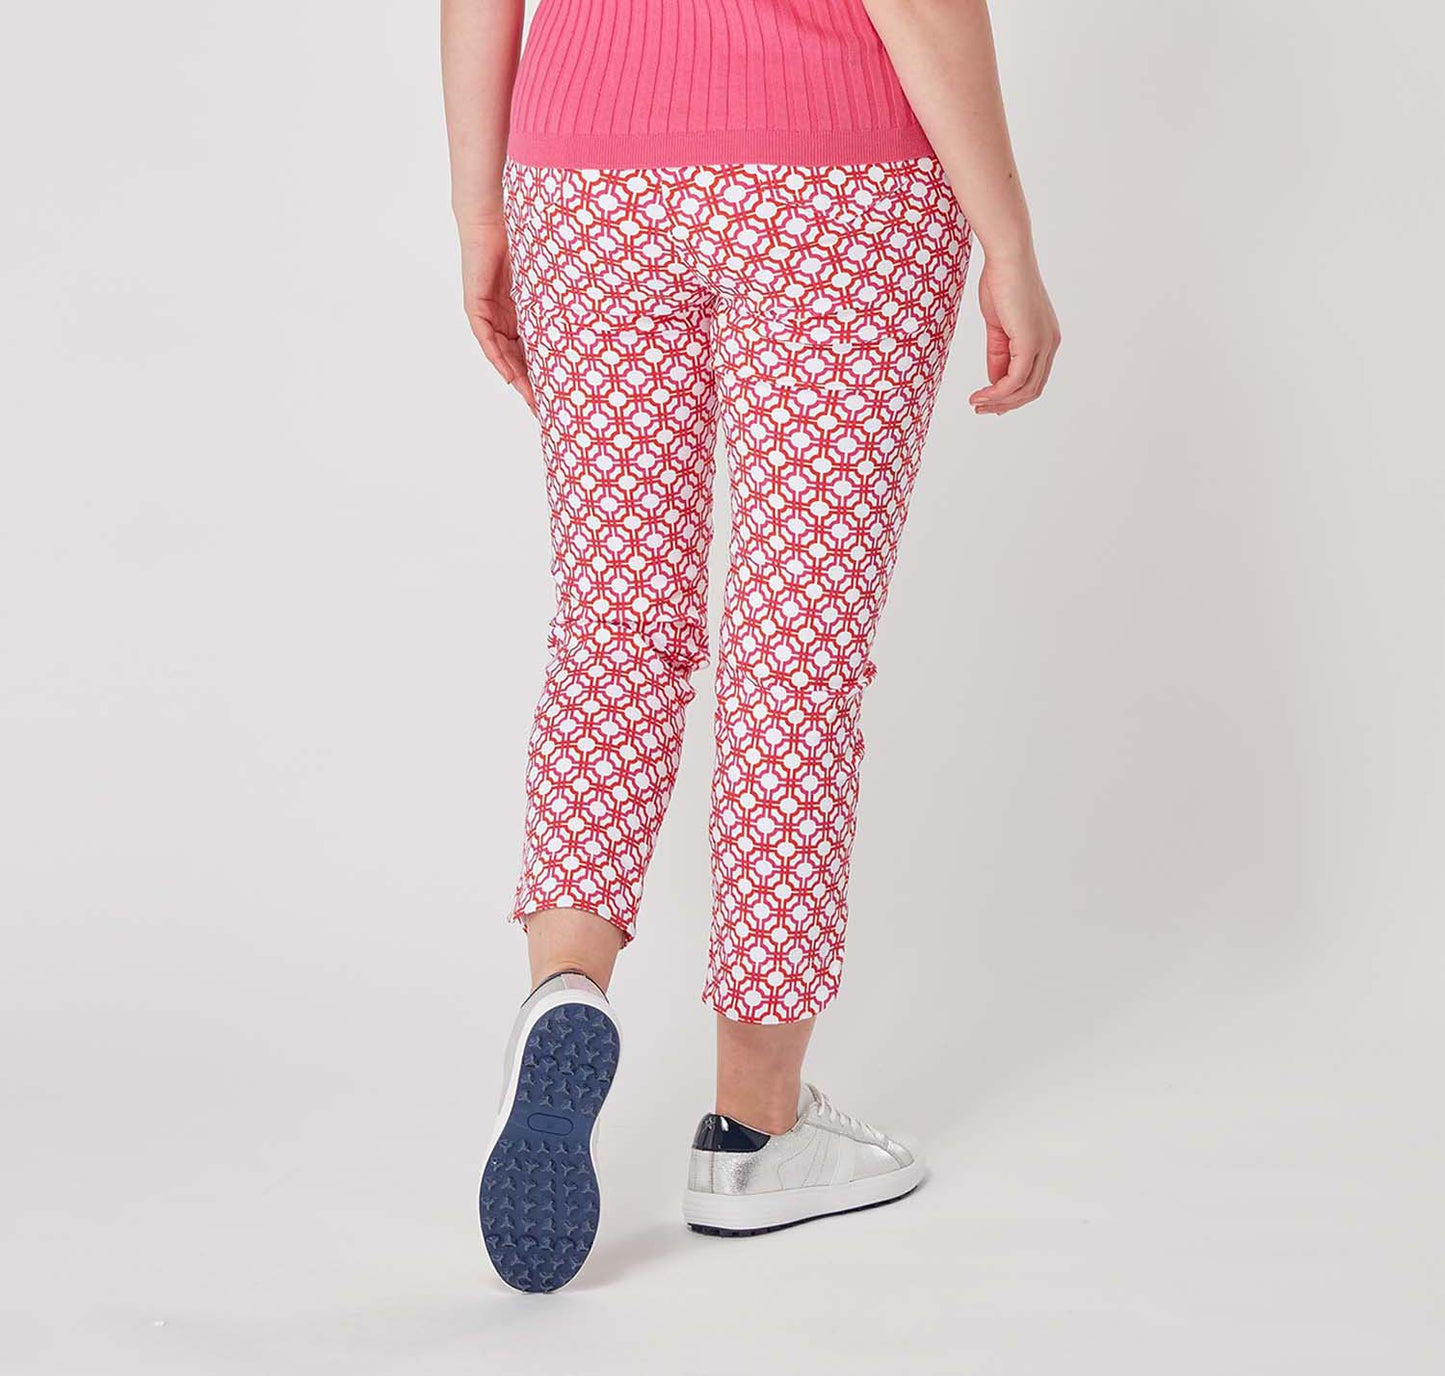 Swing Out Sister Ladies Lush Pink and Mandarin Mosaic Pattern 7/8 Trousers